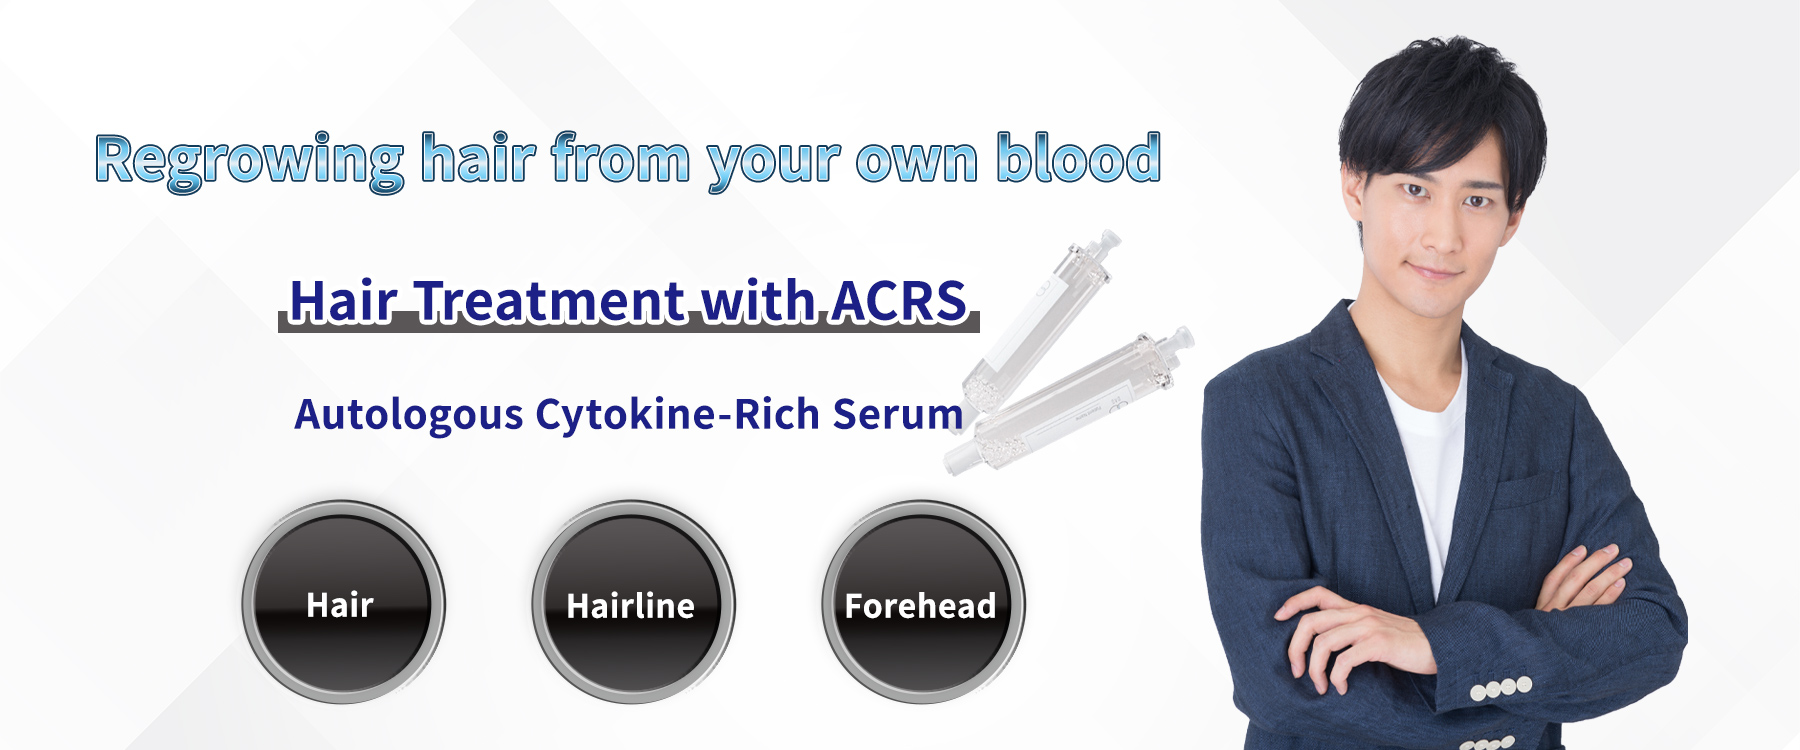 Regrowing hair from your own blood. Hair Treatment with ACRS
Autologous Cytokine-Rich Serum. Hair,Hairline,Forehead.